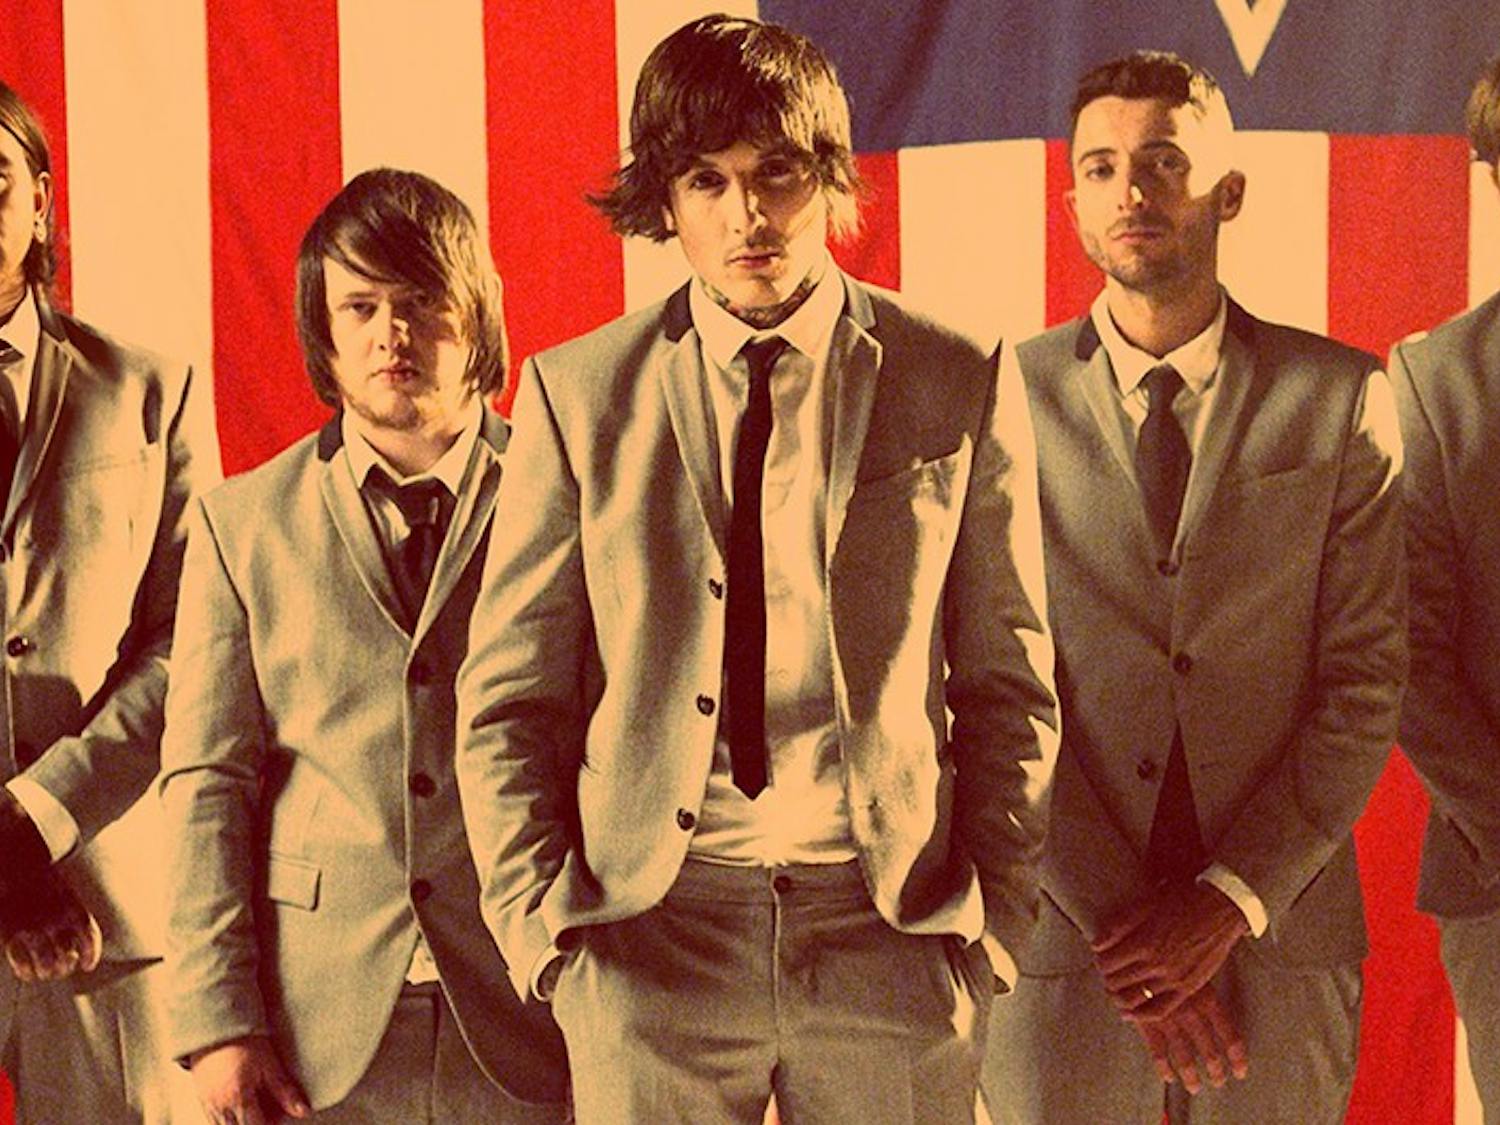 Bring Me The Horizon poses for a photo.